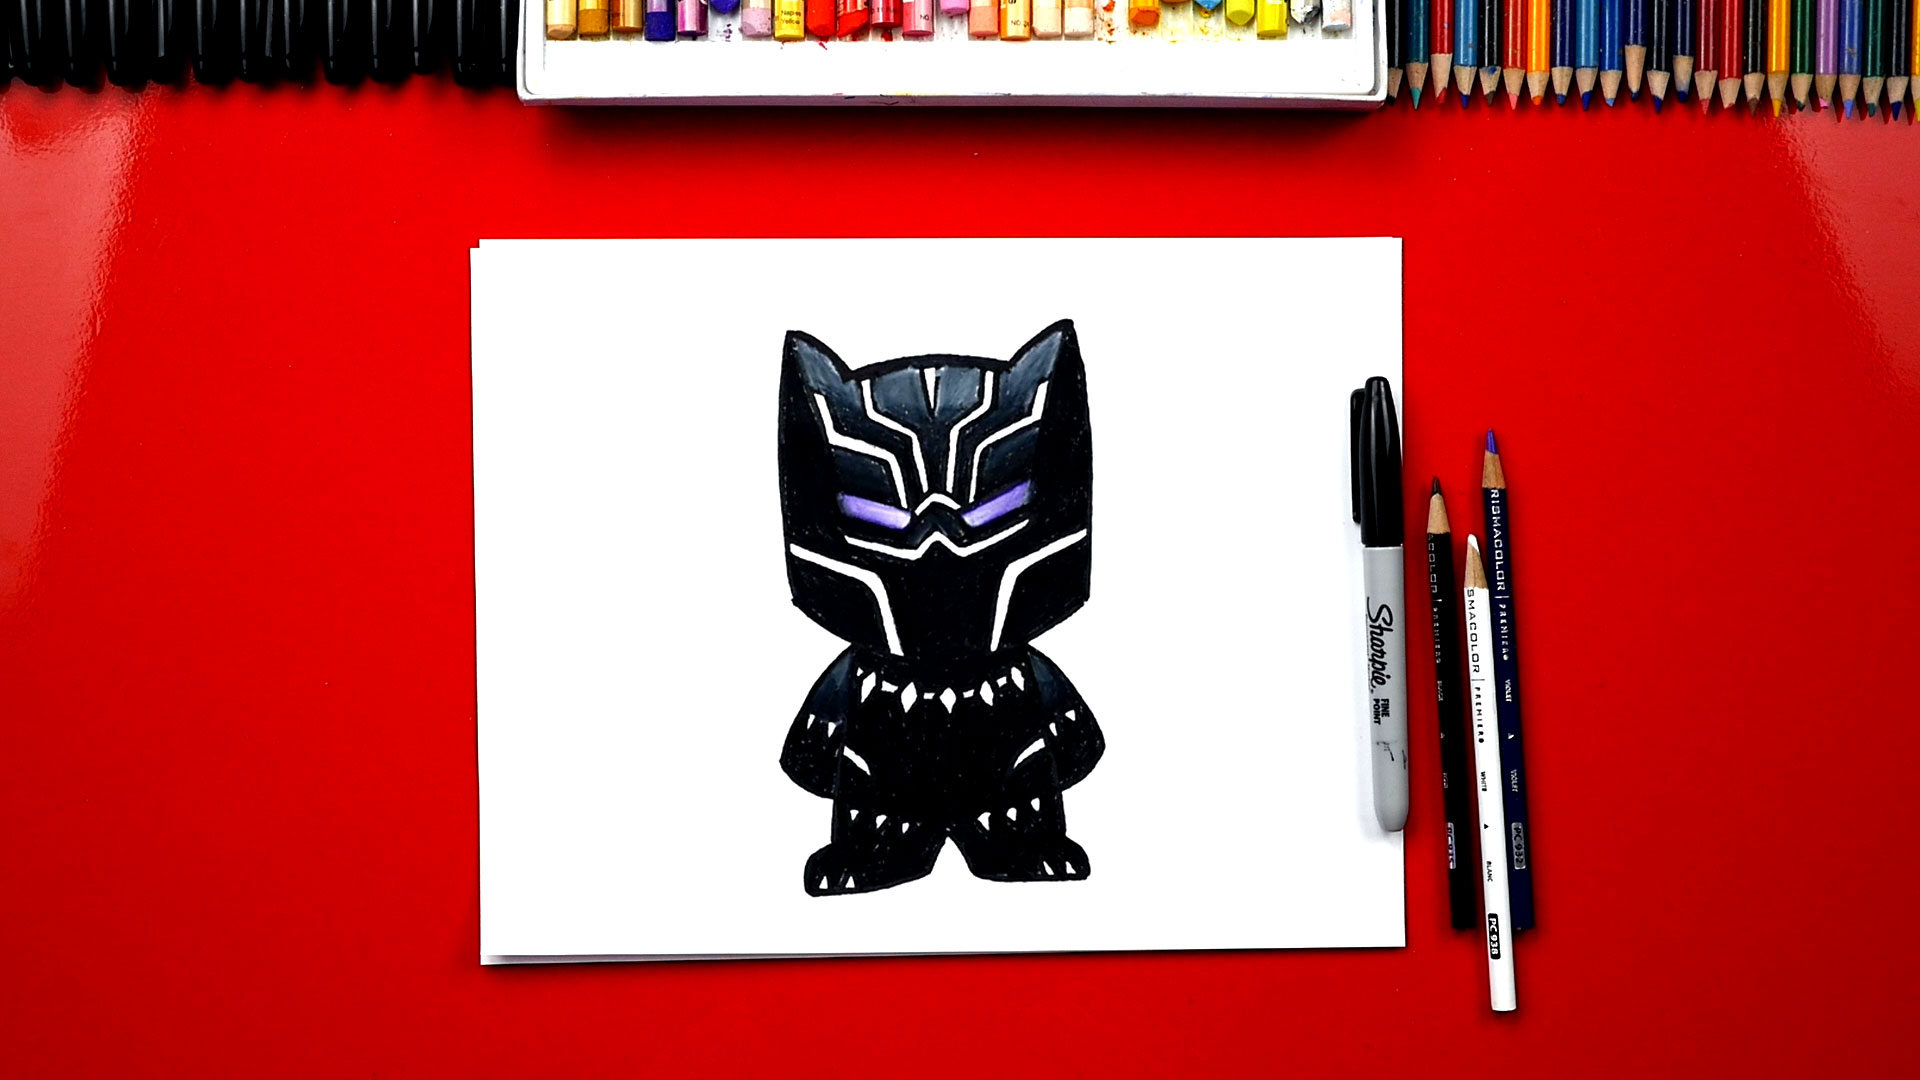 How to Draw BLACK PANTHER (Black Panther 2018)